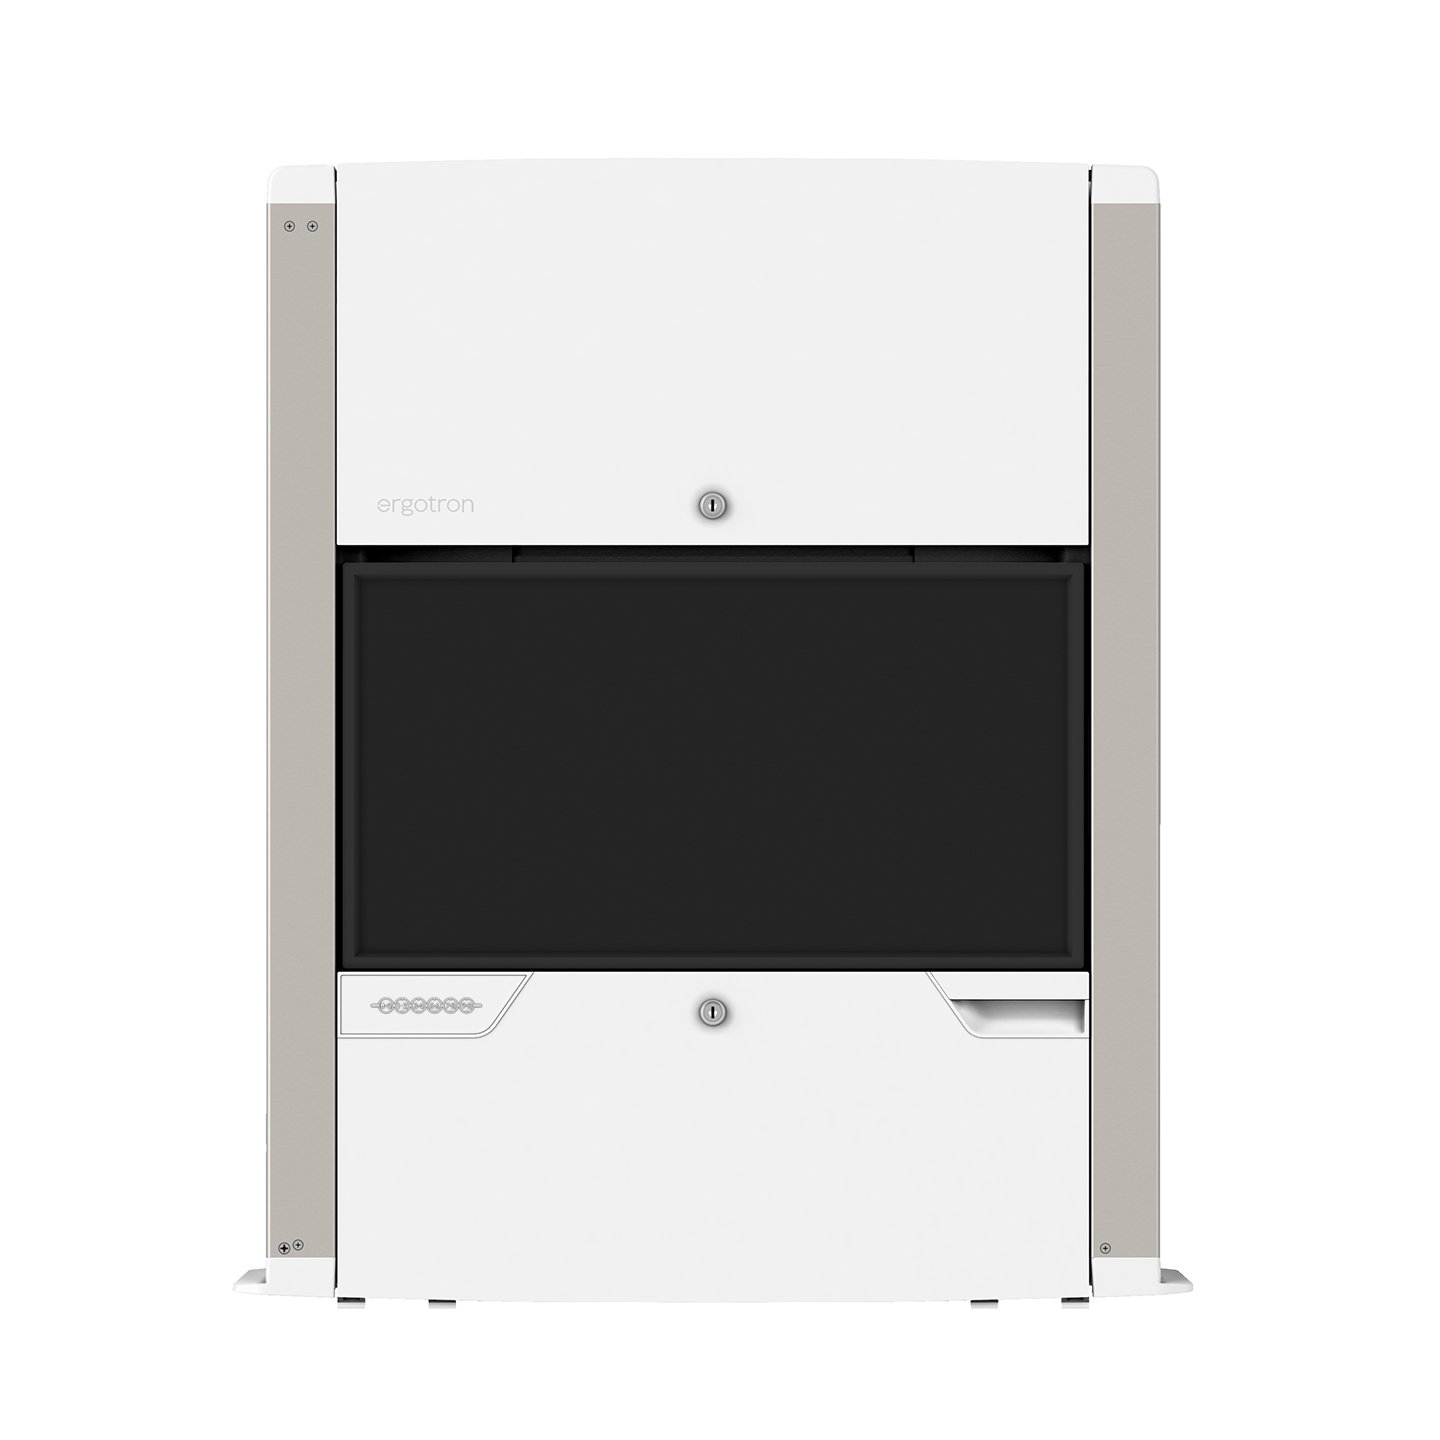 Haworth Carefit Enclosure Workspace at a front view in a white color